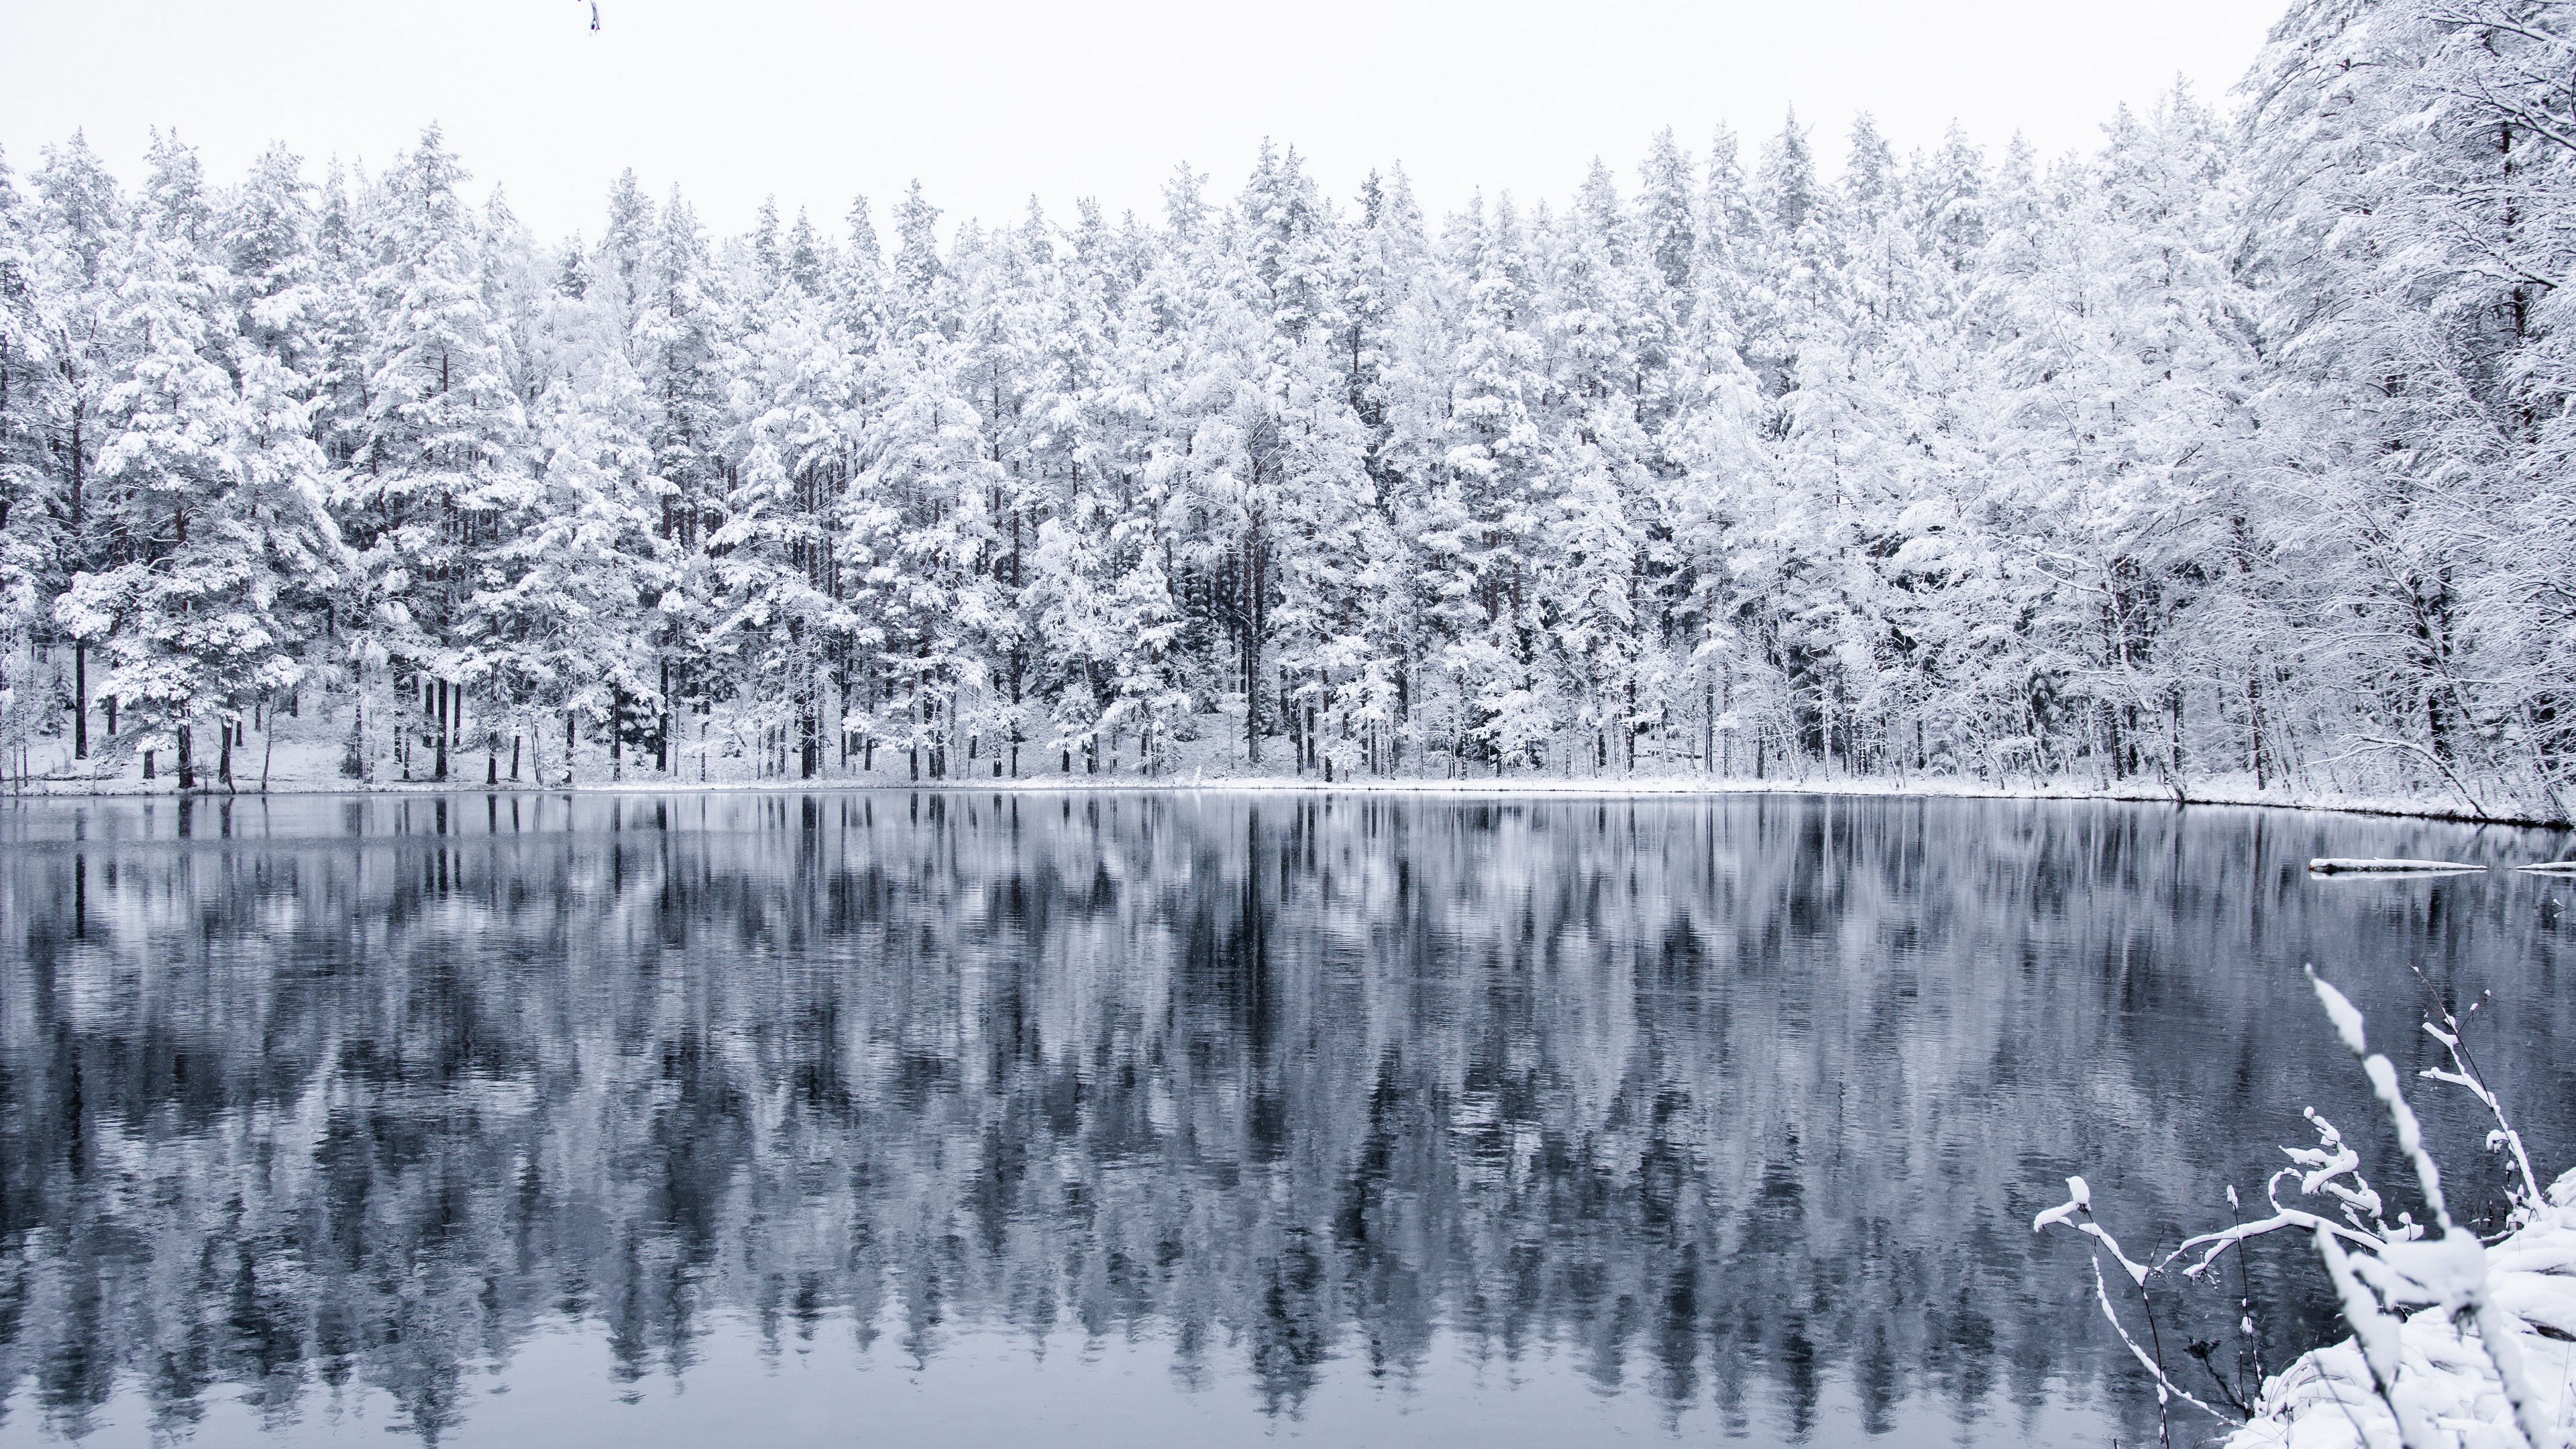 Download wallpaper 3840x2160 winter, forest, lake, snow, reflection 4k uhd 16:9 HD background